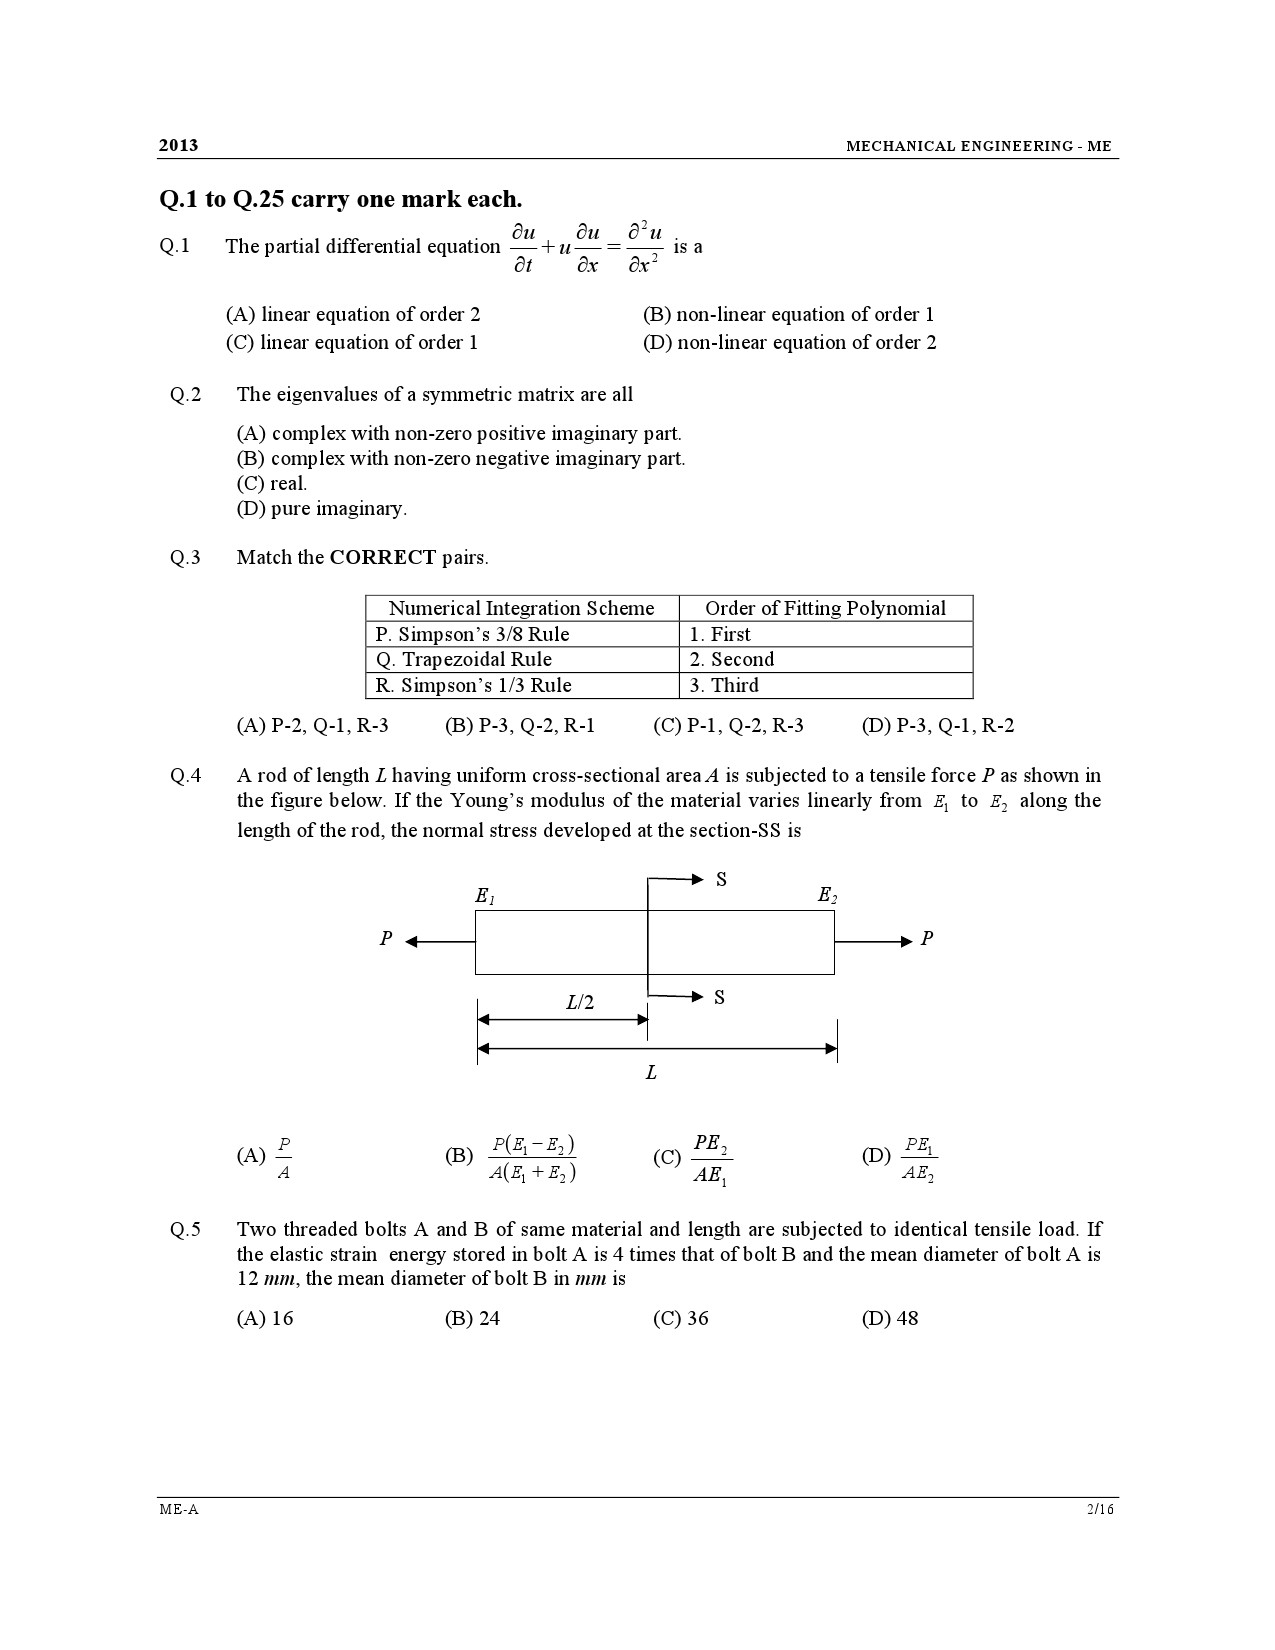 GATE Exam Question Paper 2013 Mechanical Engineering 2